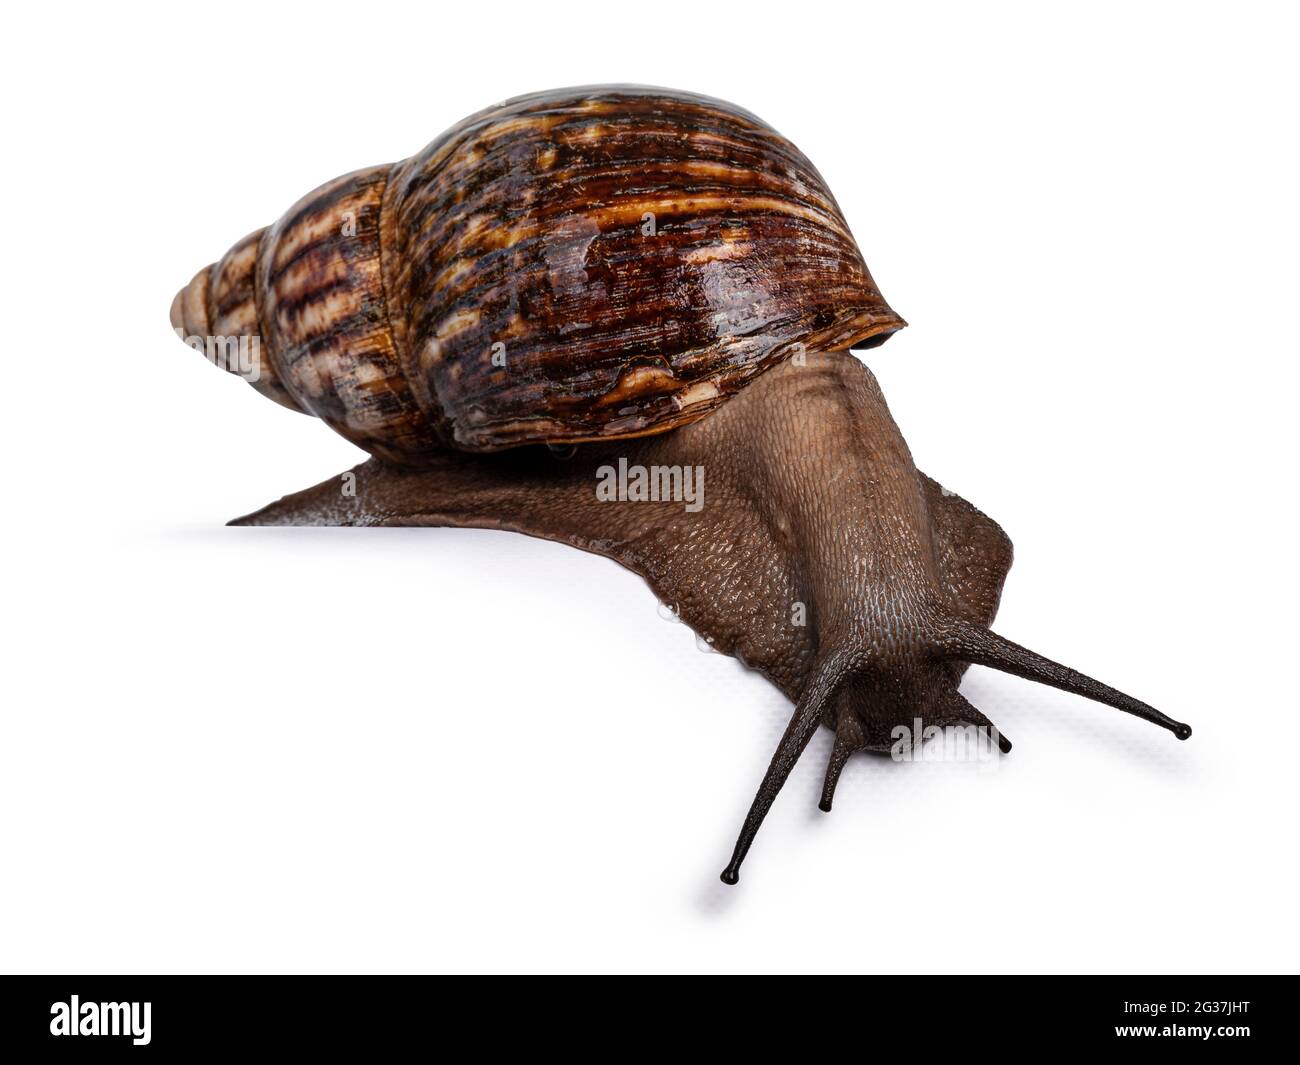 Giant West African snail, moving down from edge. Isolated on a white background. Stock Photo